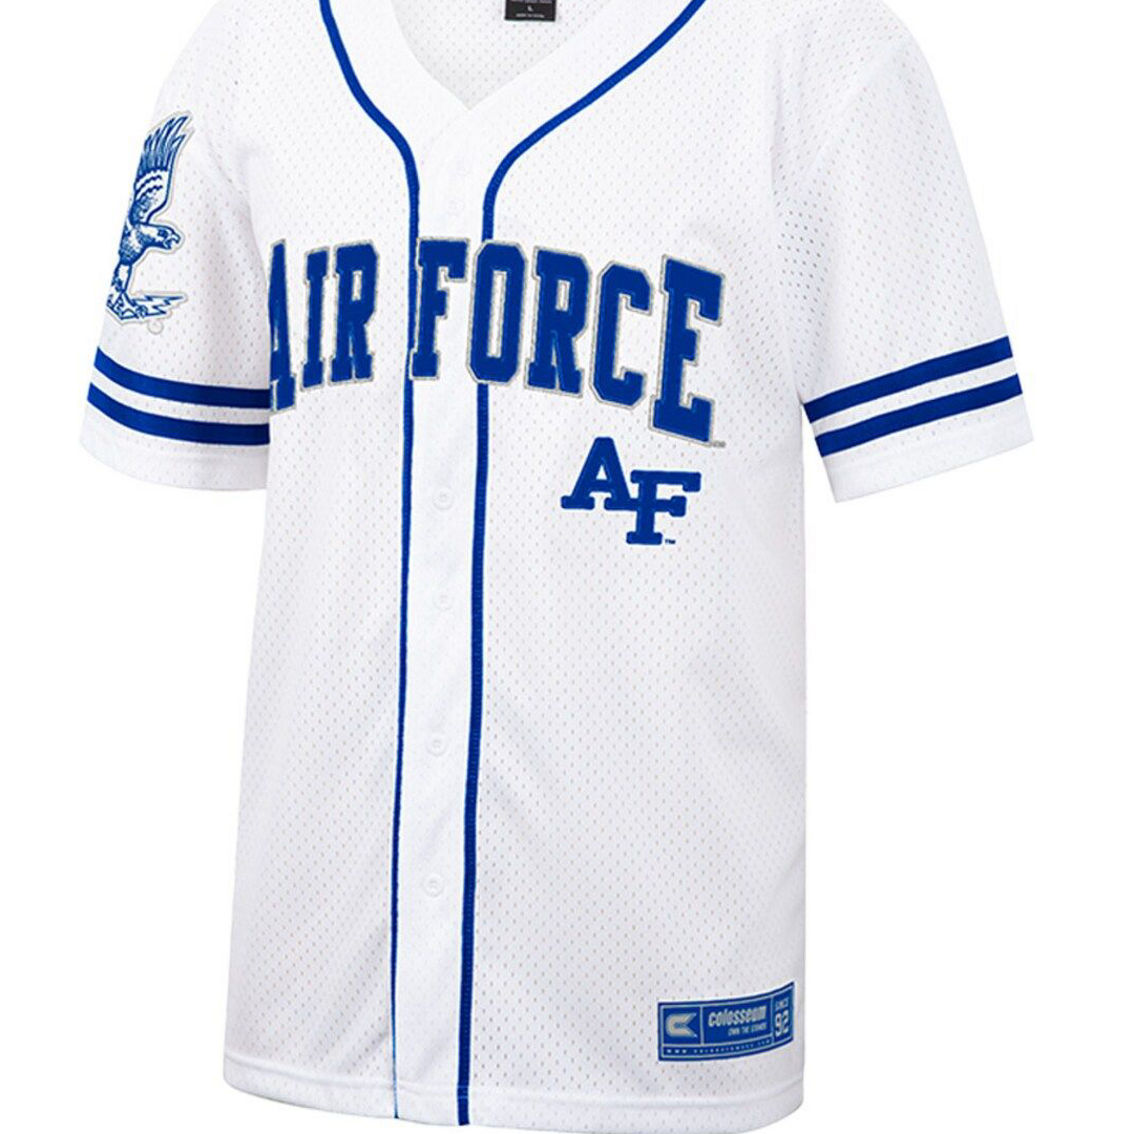 Colosseum Men's White Air Force Falcons Free Spirited Mesh Button-Up Baseball Jersey - Image 3 of 4